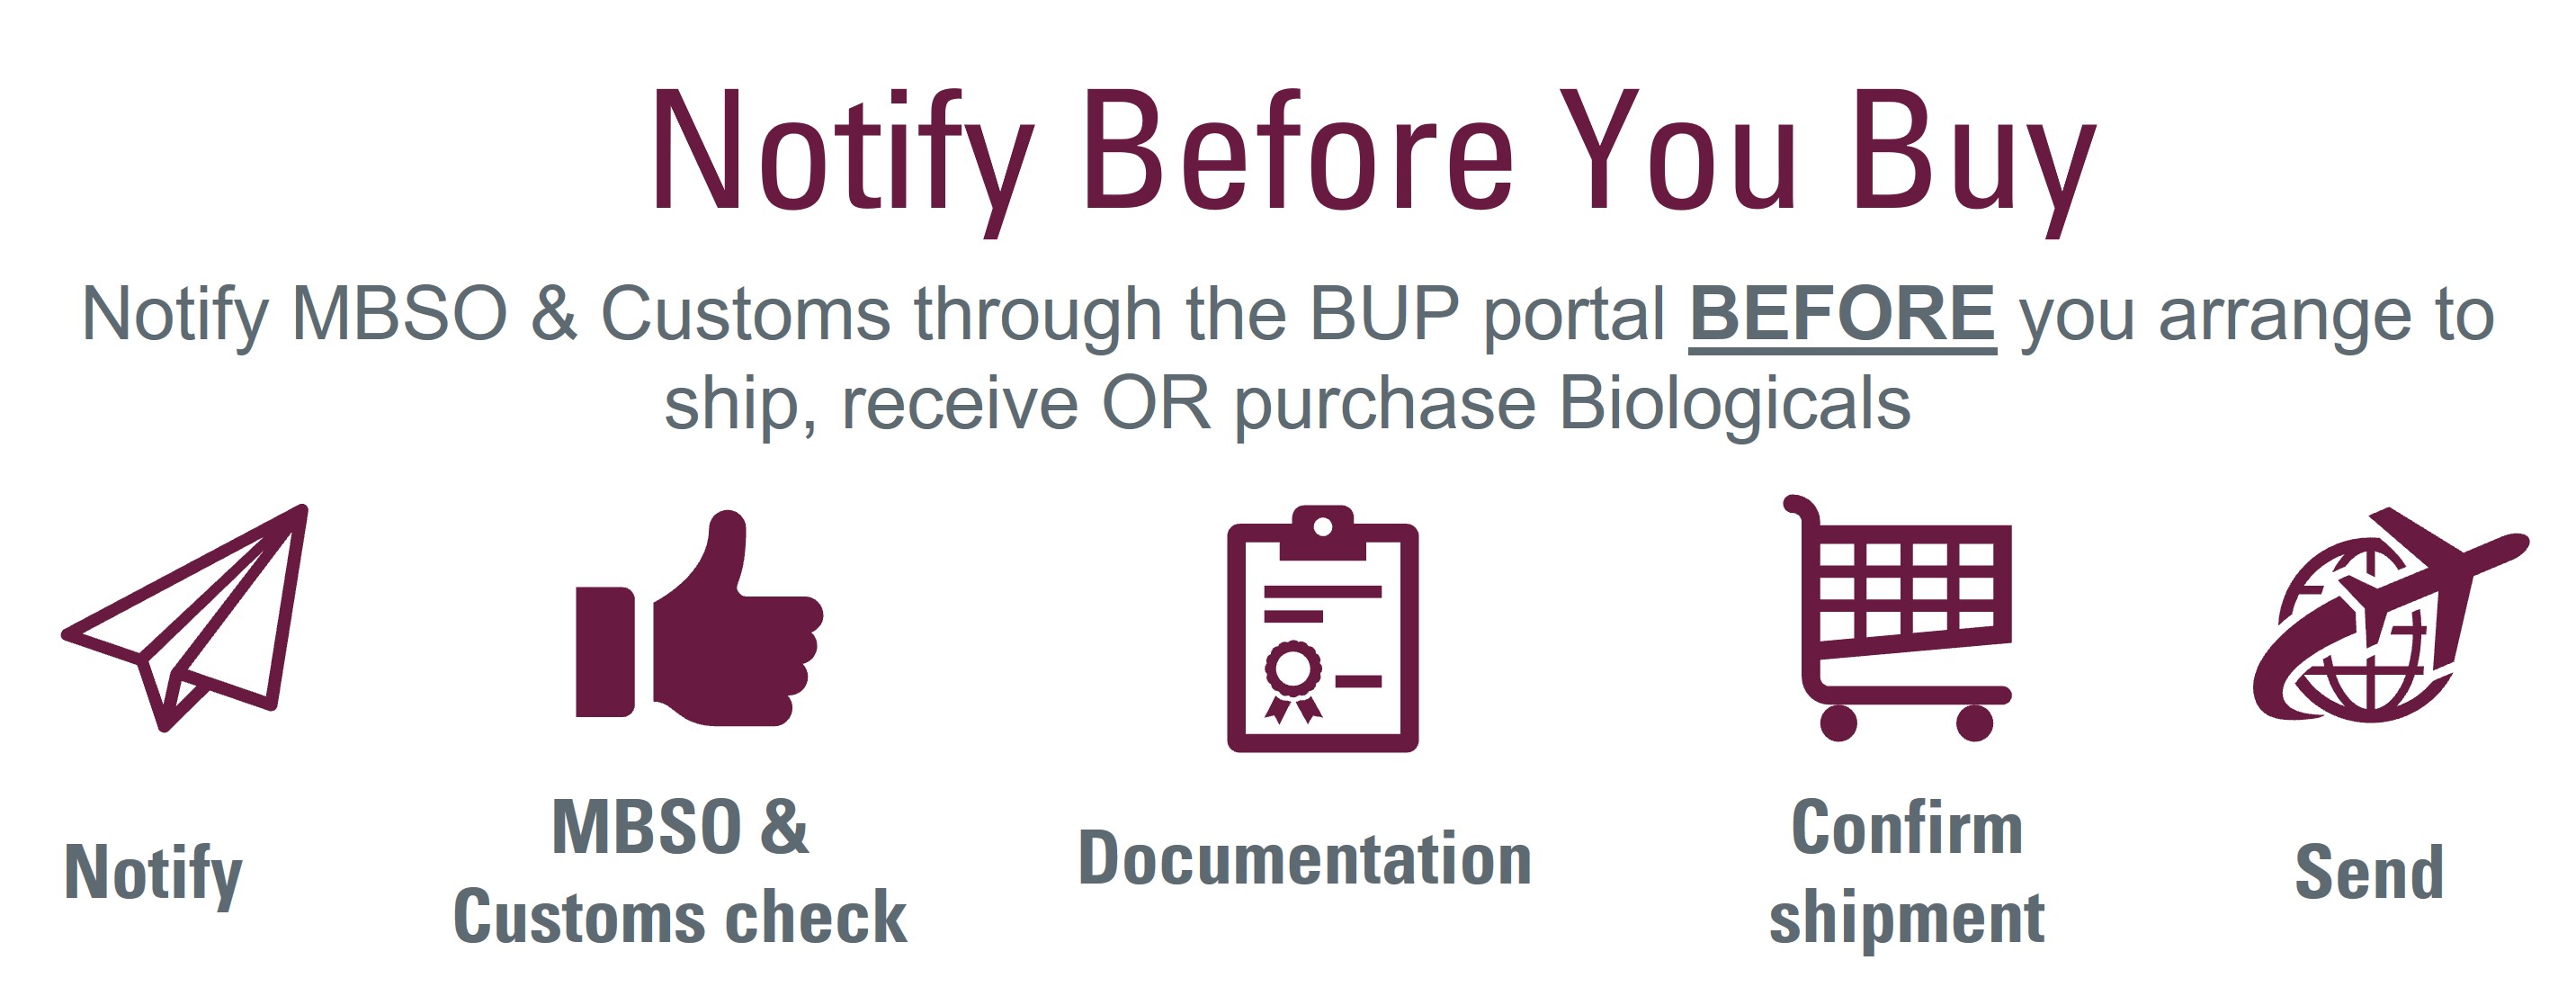 Notify Before You Buy - notify the MBSO and Customs through the BUP portal before you arrange to ship, receive or purchase biologicals.